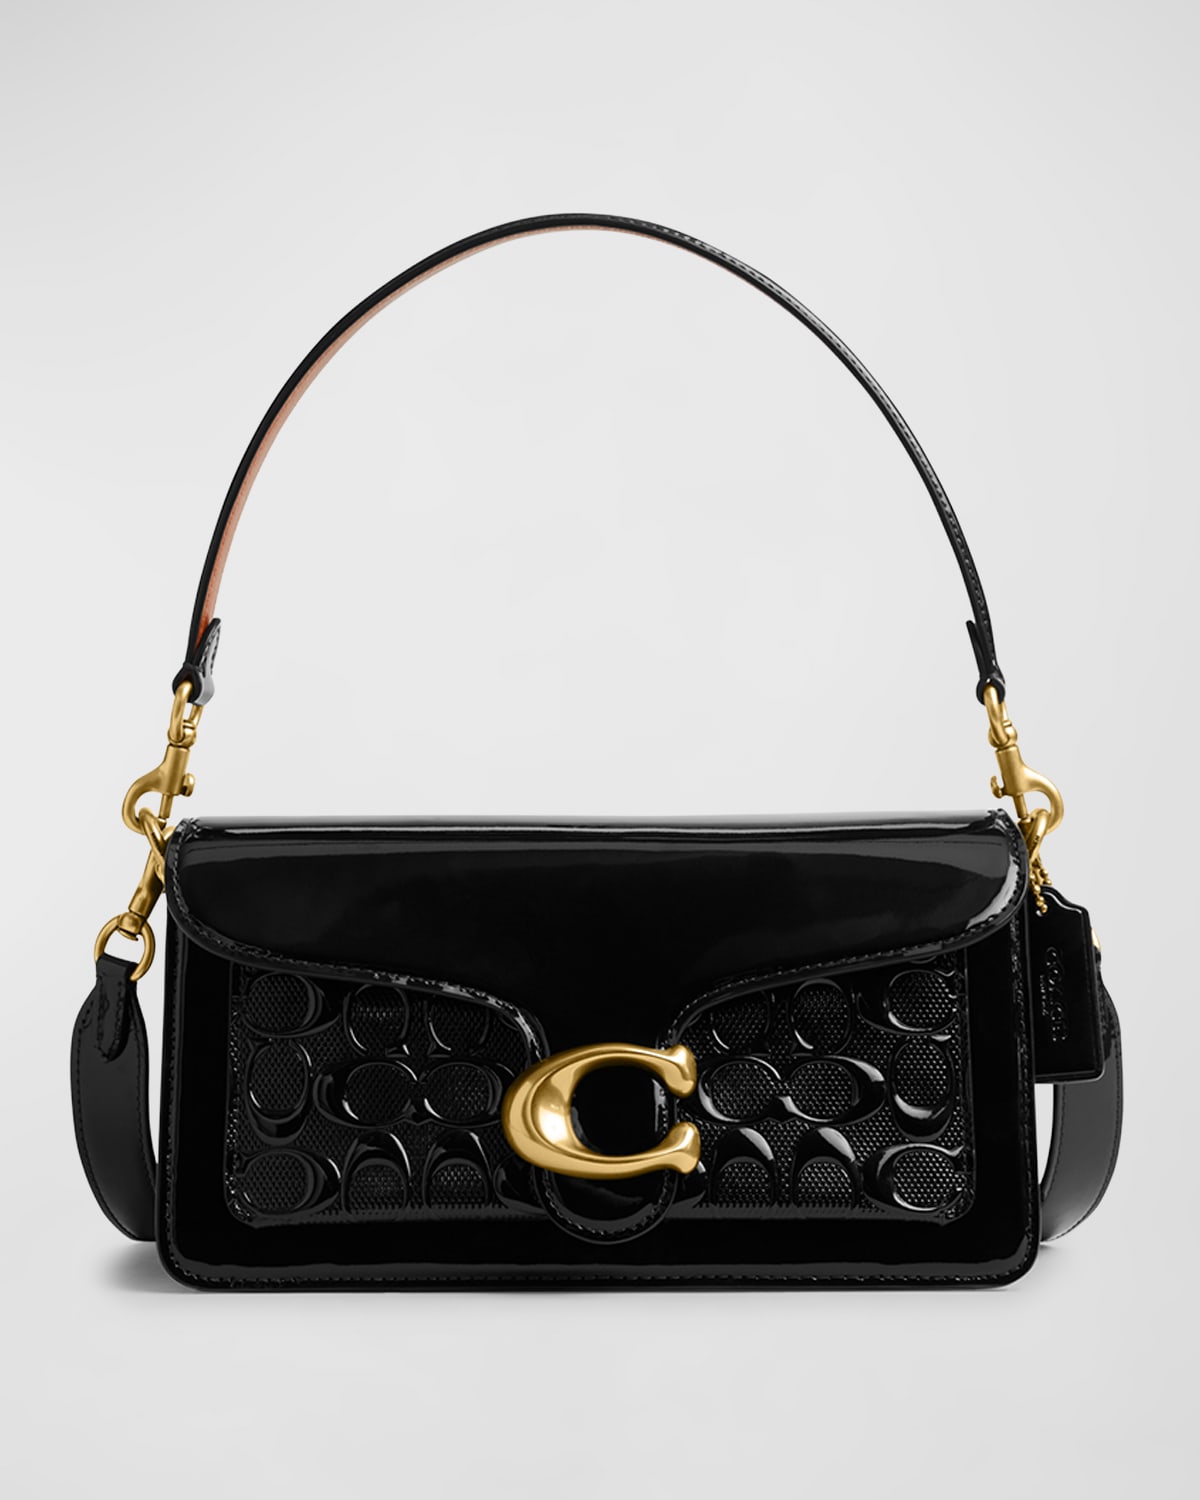 Coach Shoulder Bag Tabby 26 Brass/Dark Stone in Leather with Gold